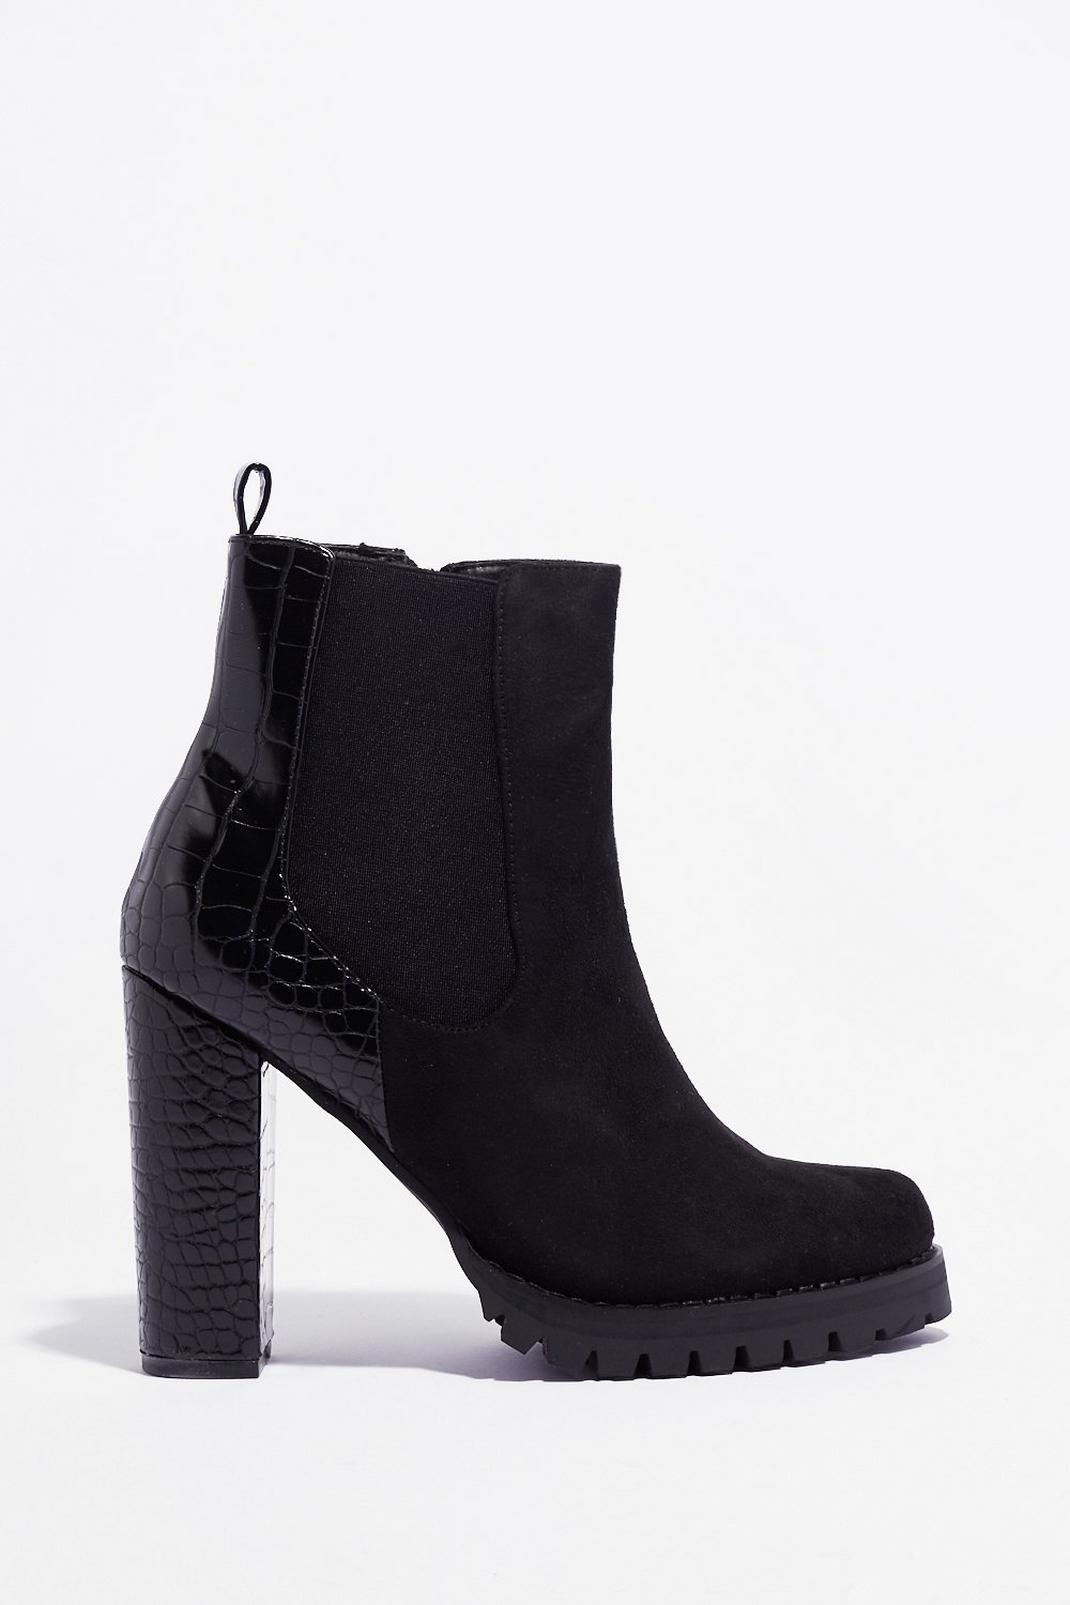 Black Croc Embossed Faux Suede Heeled Boots image number 1